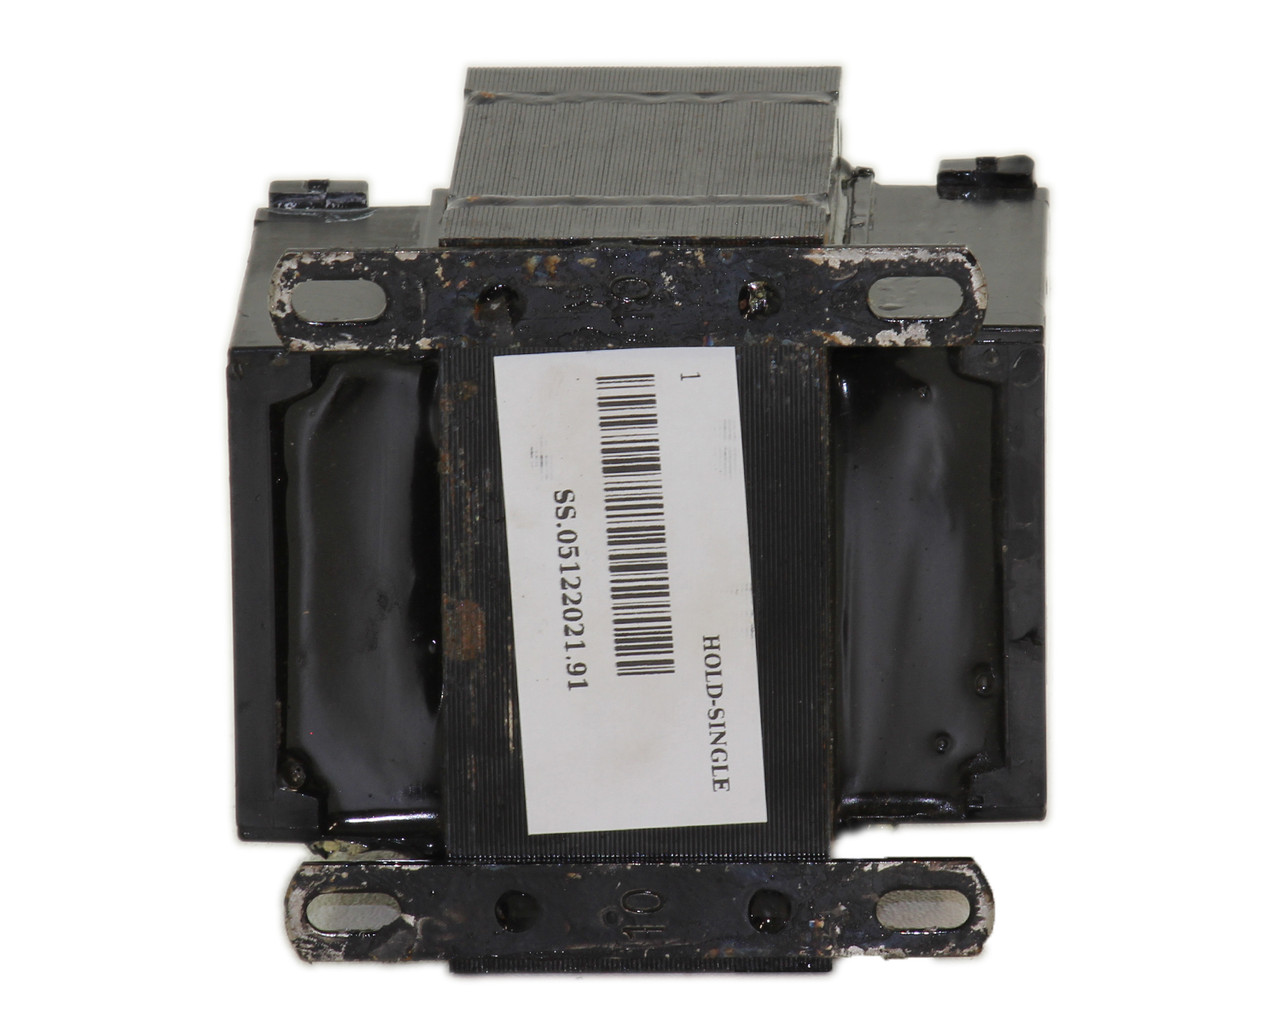 Cutler-Hammer C0150E2AFB Transformer .150KVA Primary: 480 Secondary: 120 With Fuse Holder 30312R 600V 30 AMPS